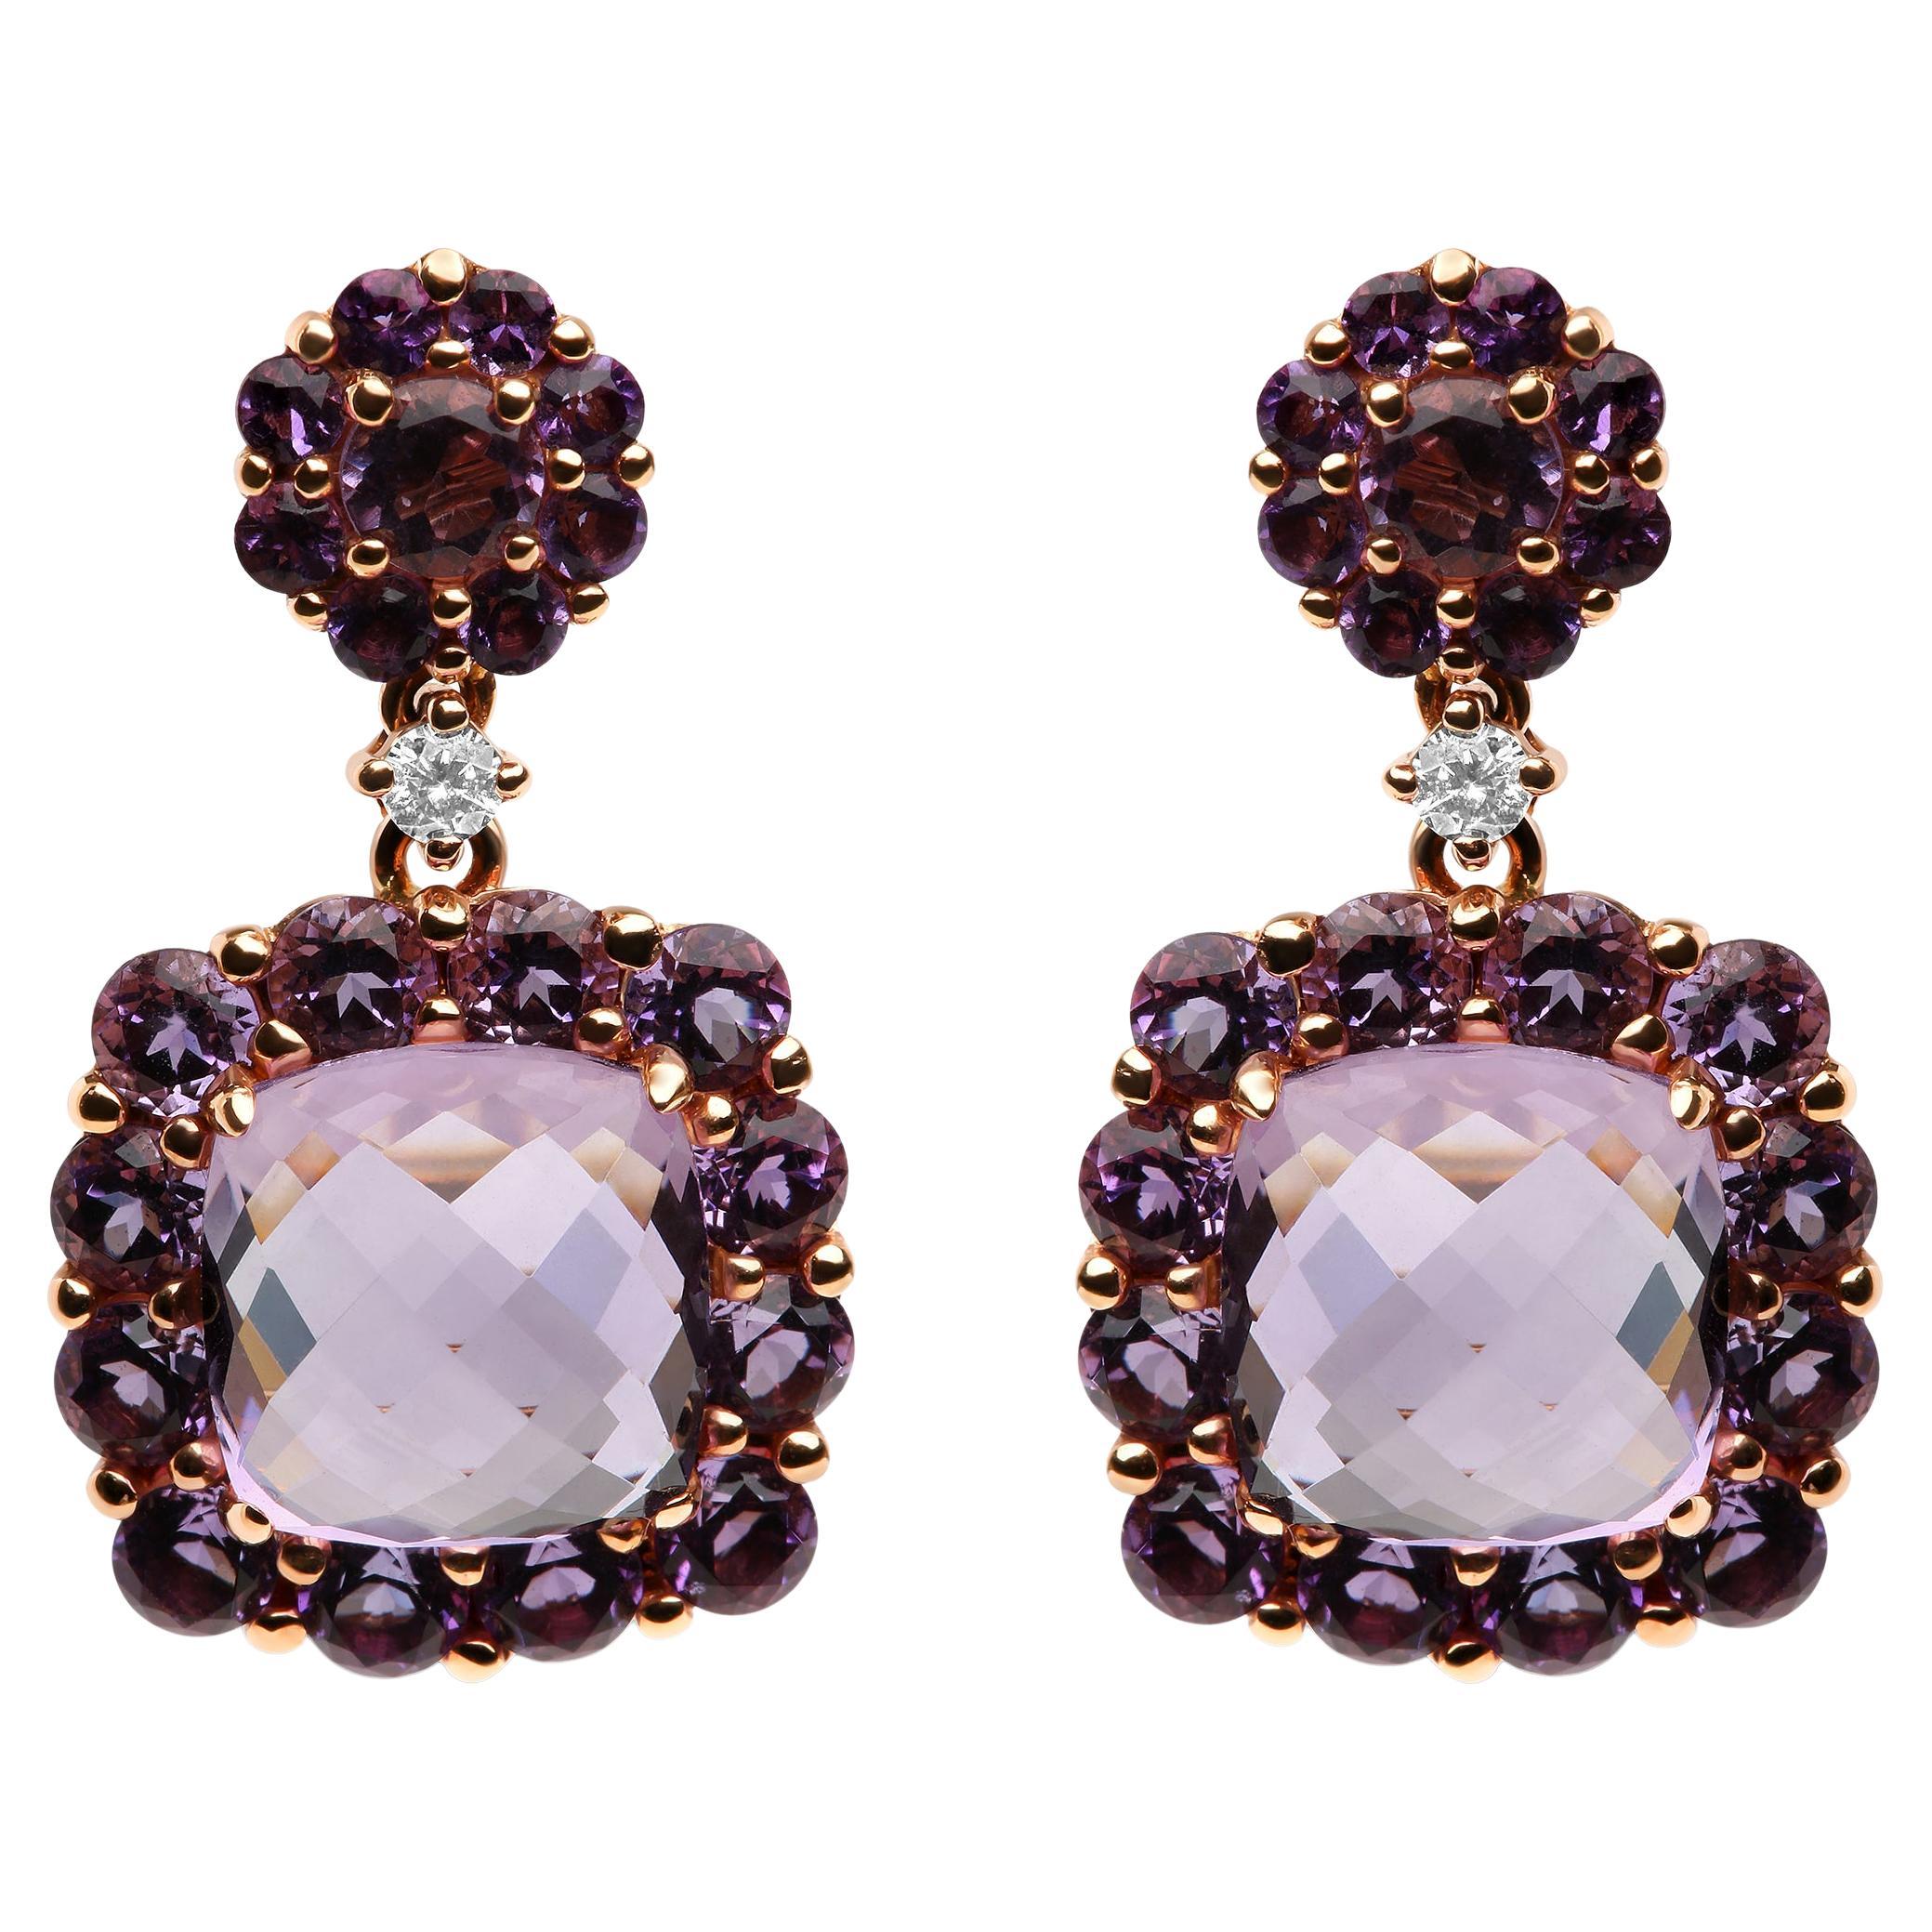 18K Rose Gold Diamond Accent &Pink and Purple Amethyst Gemstone Dangle Earrings